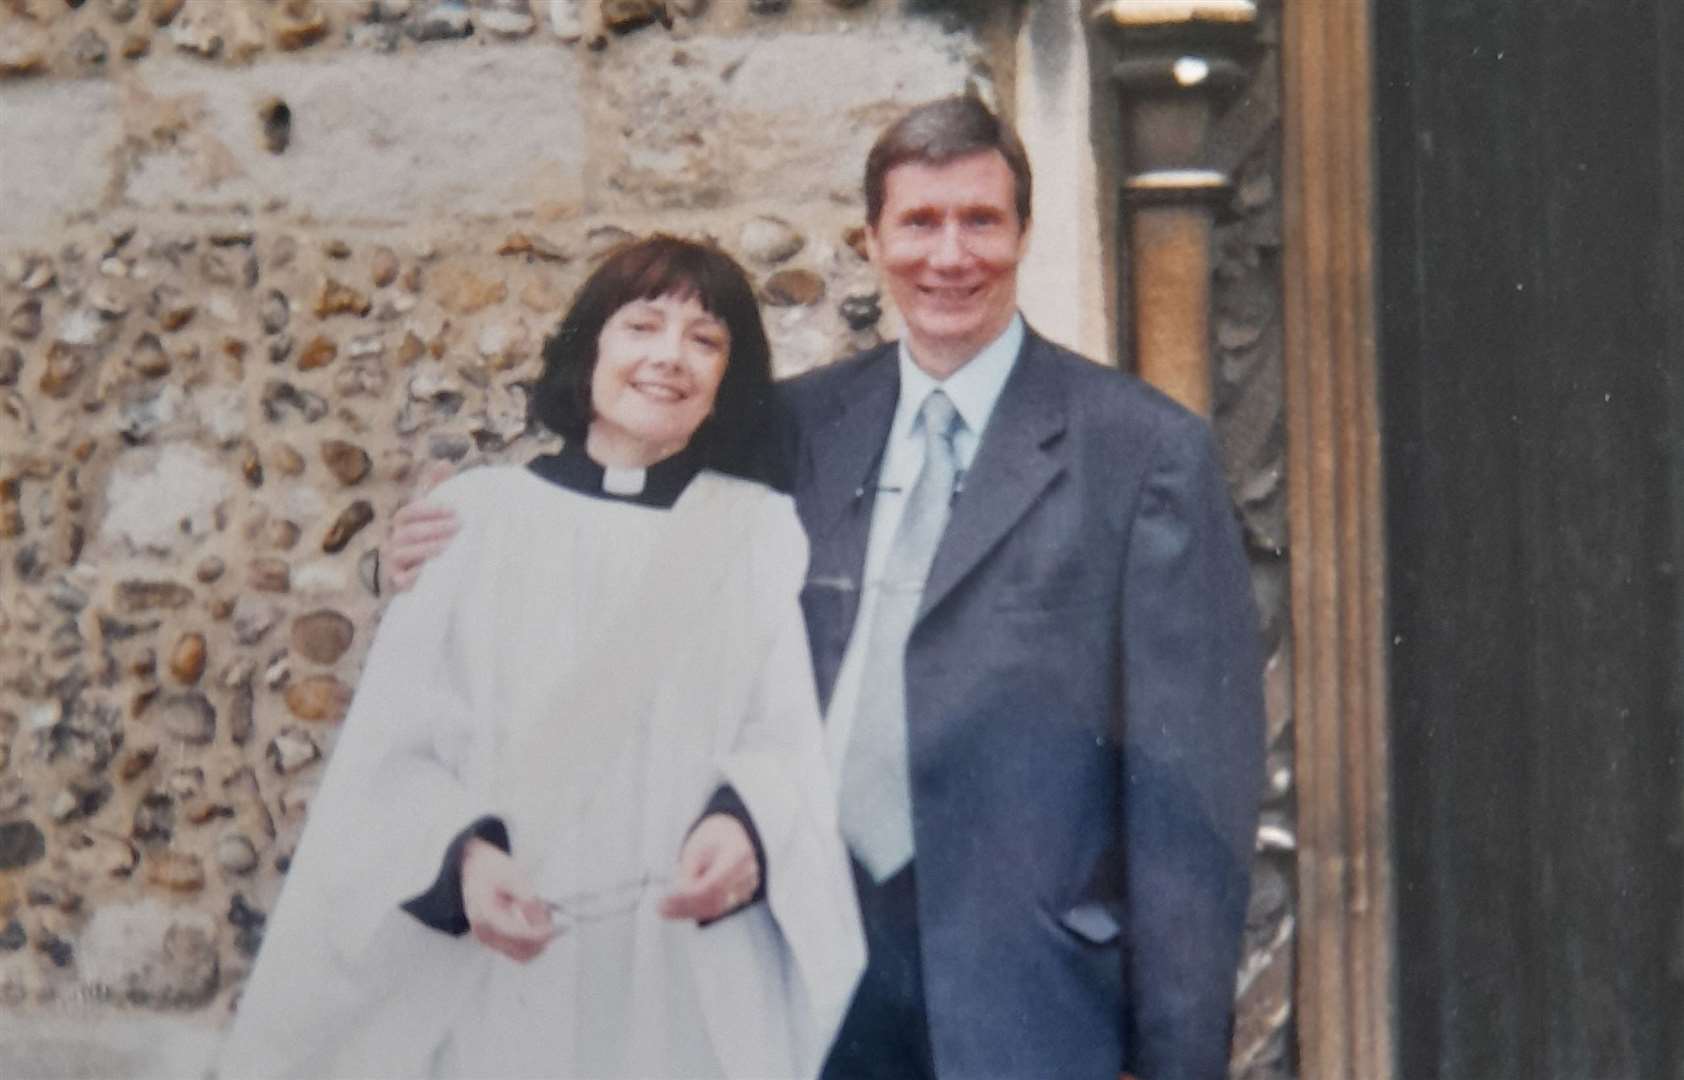 Paul and wife Kate when she was ordained